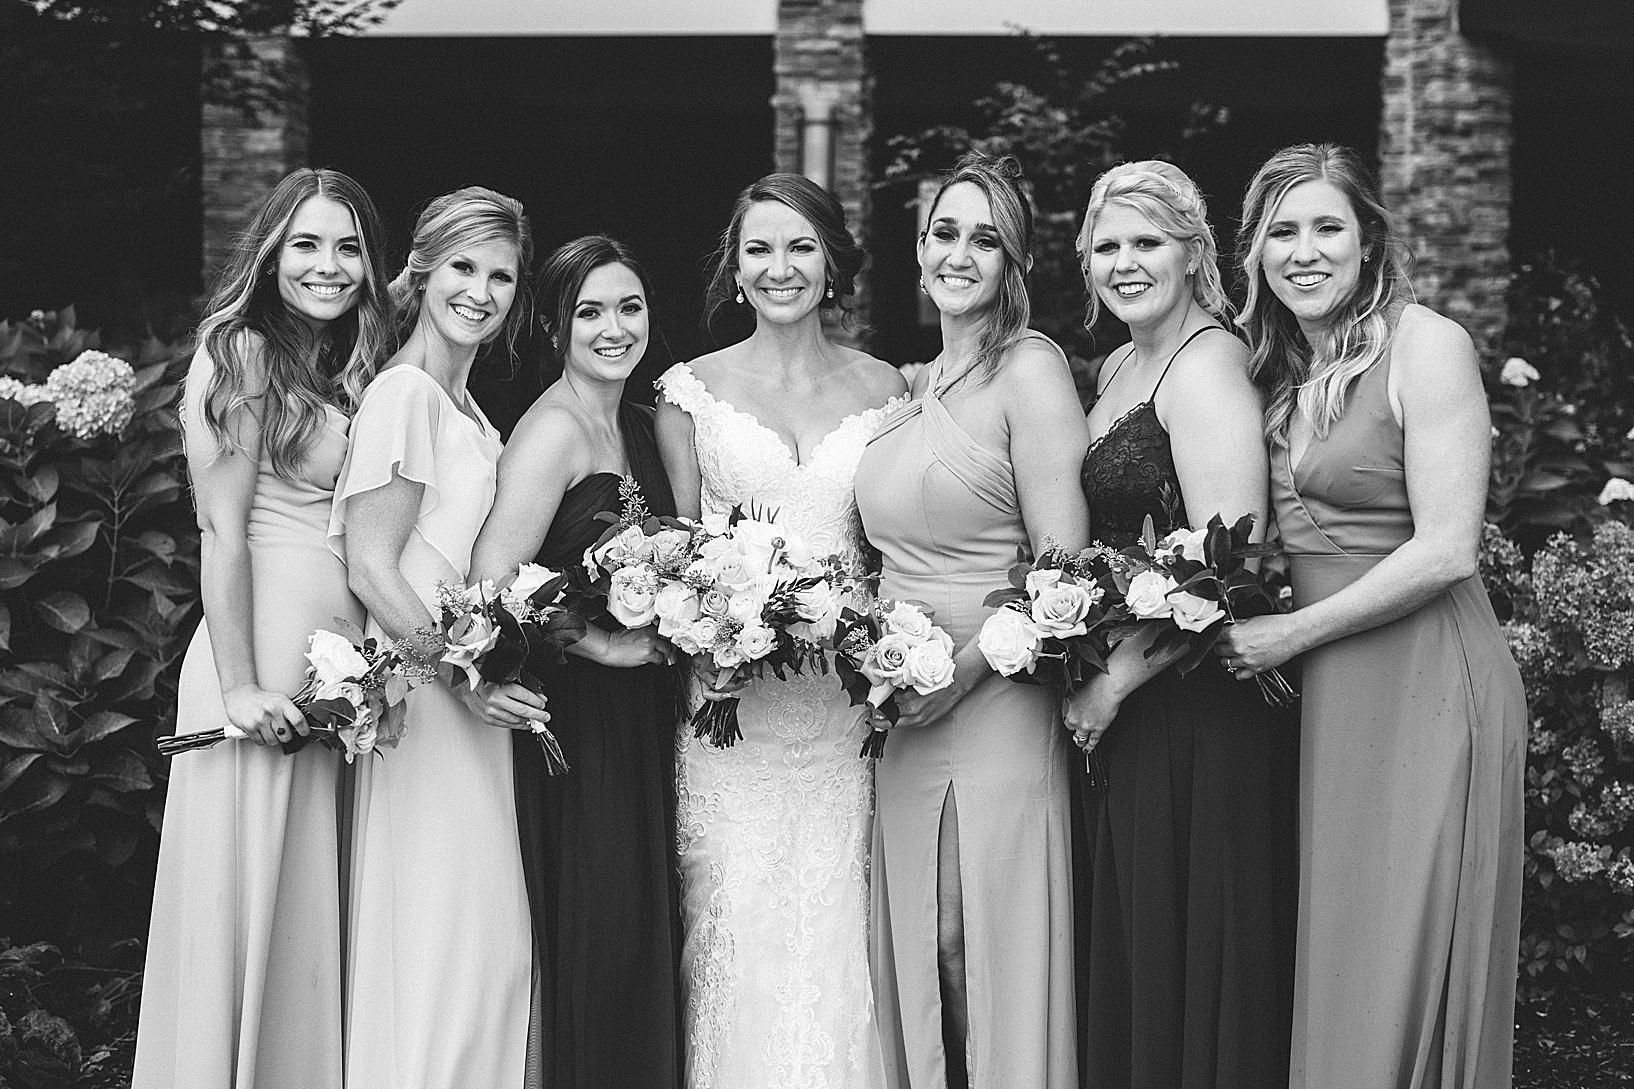 The bridal party stands and smiles while holding their bouquets